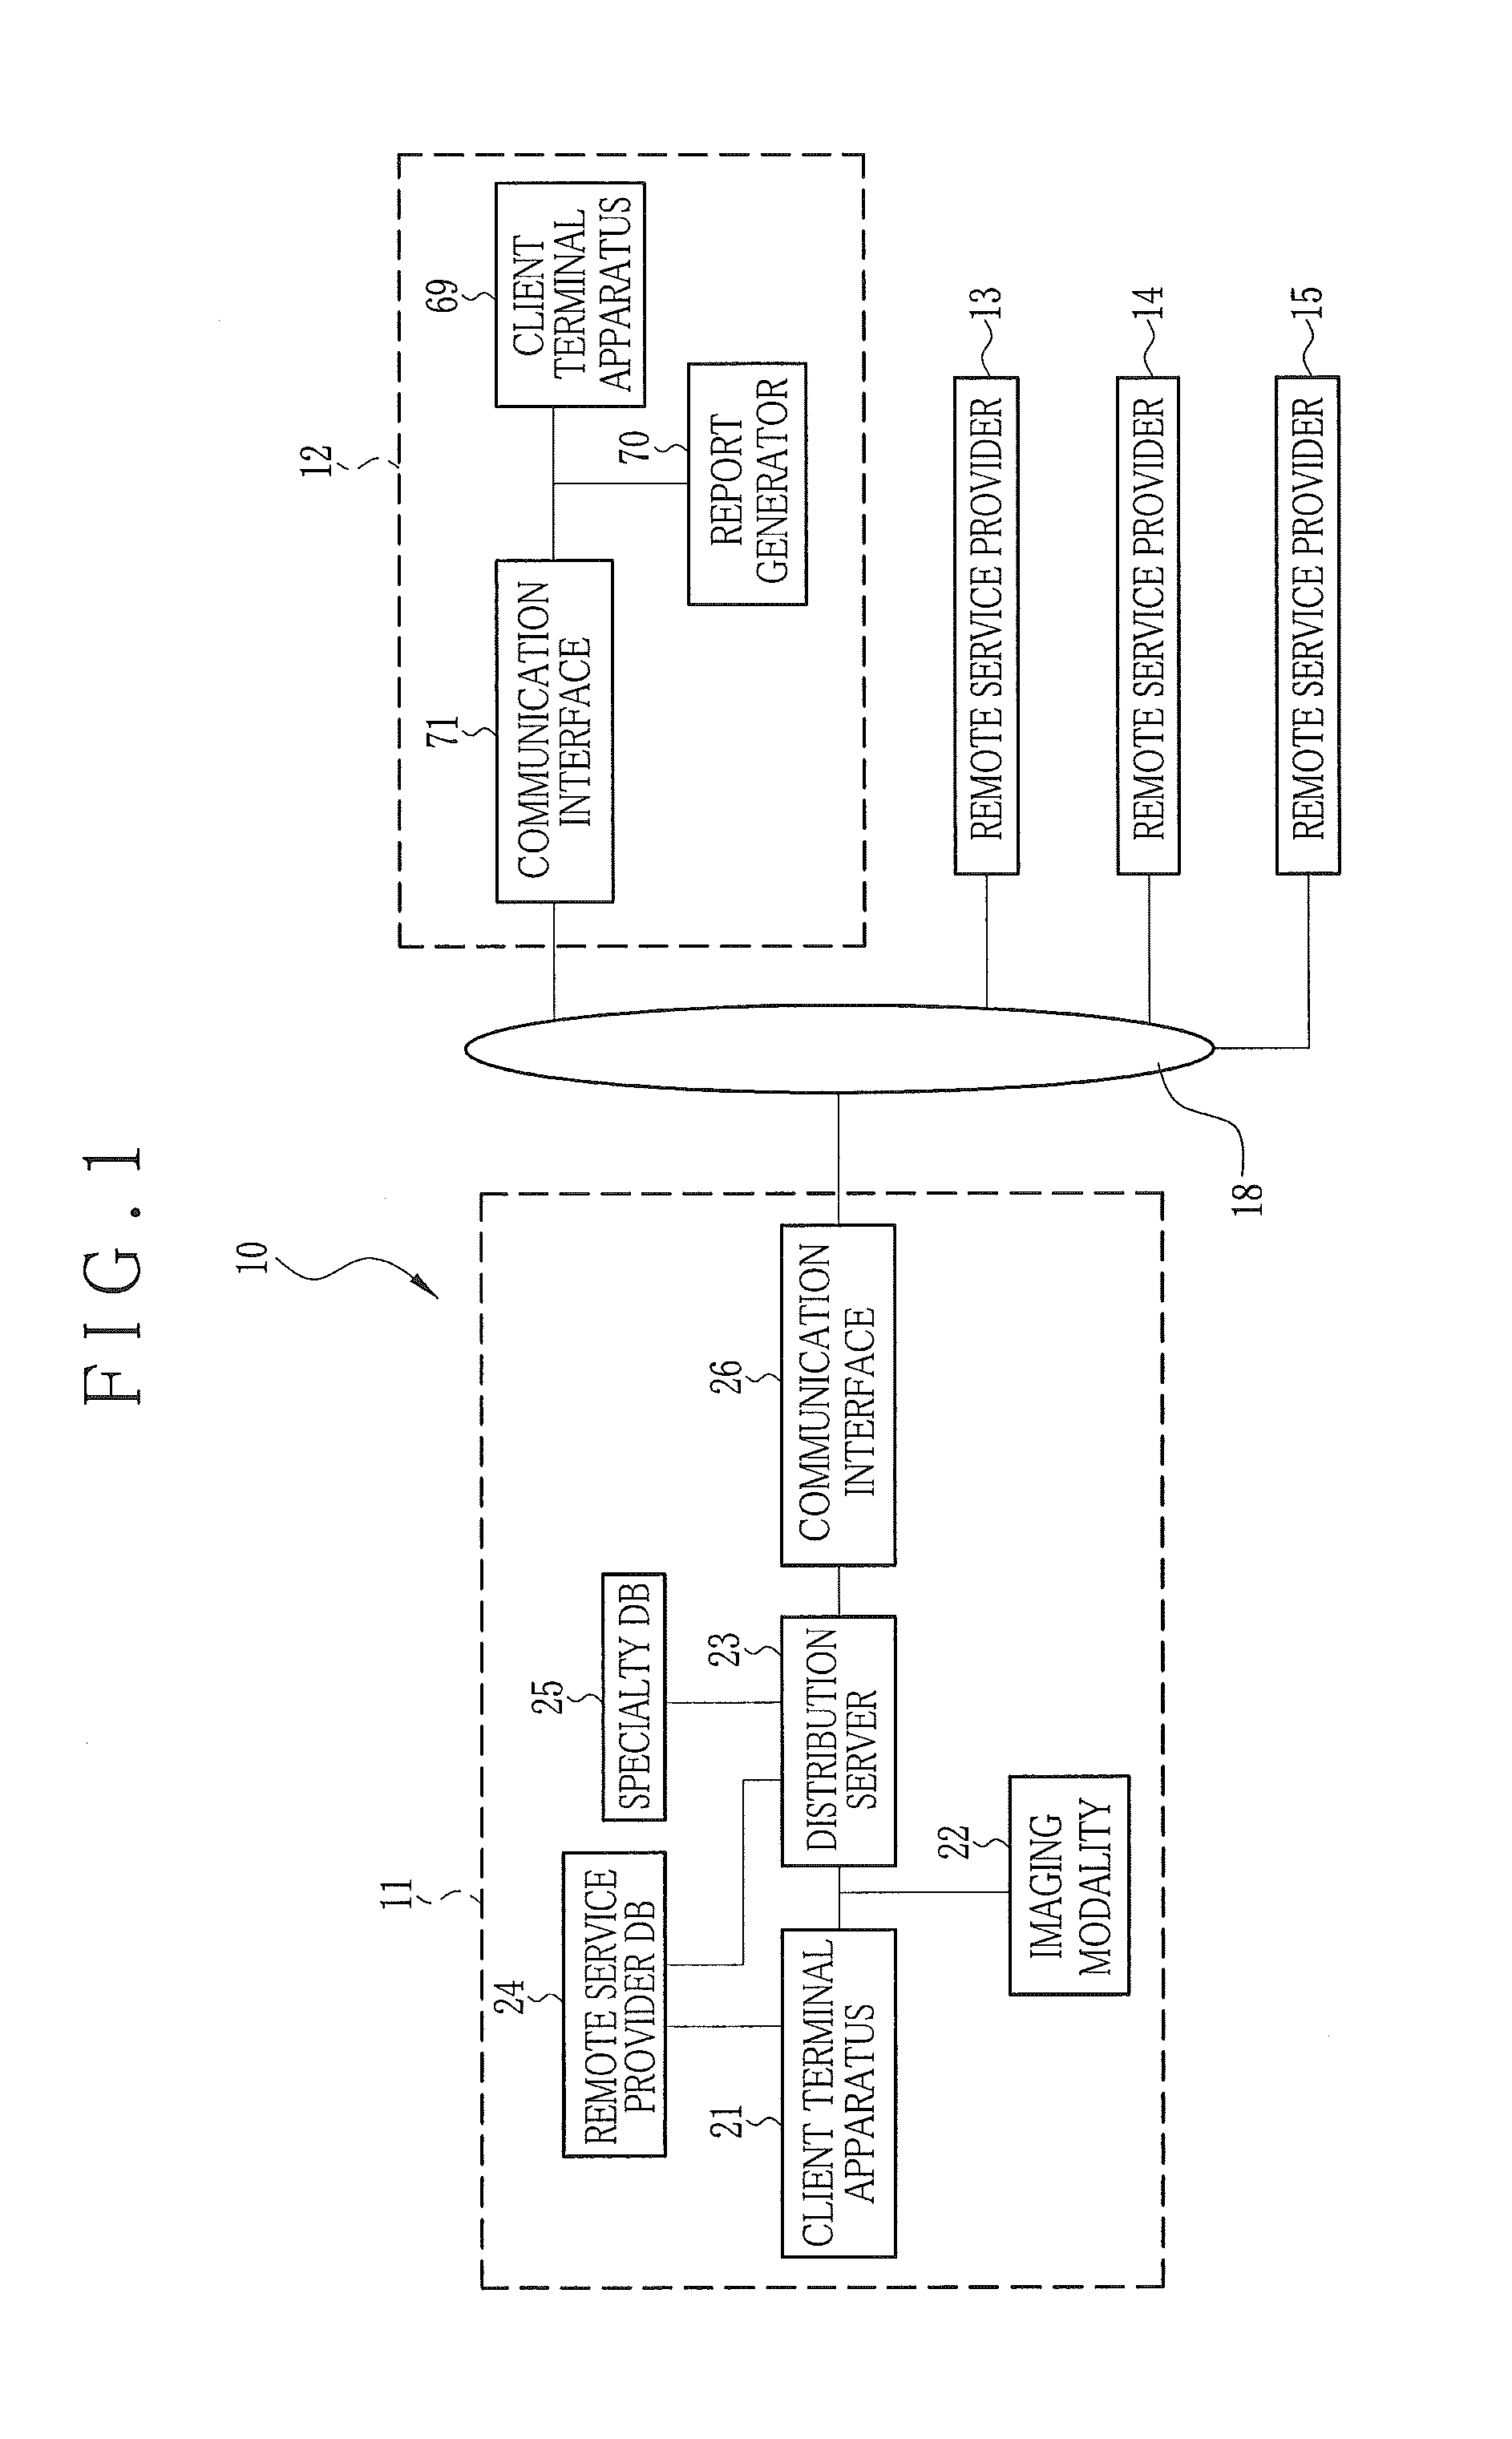 Remote diagnostic system and method for medical image